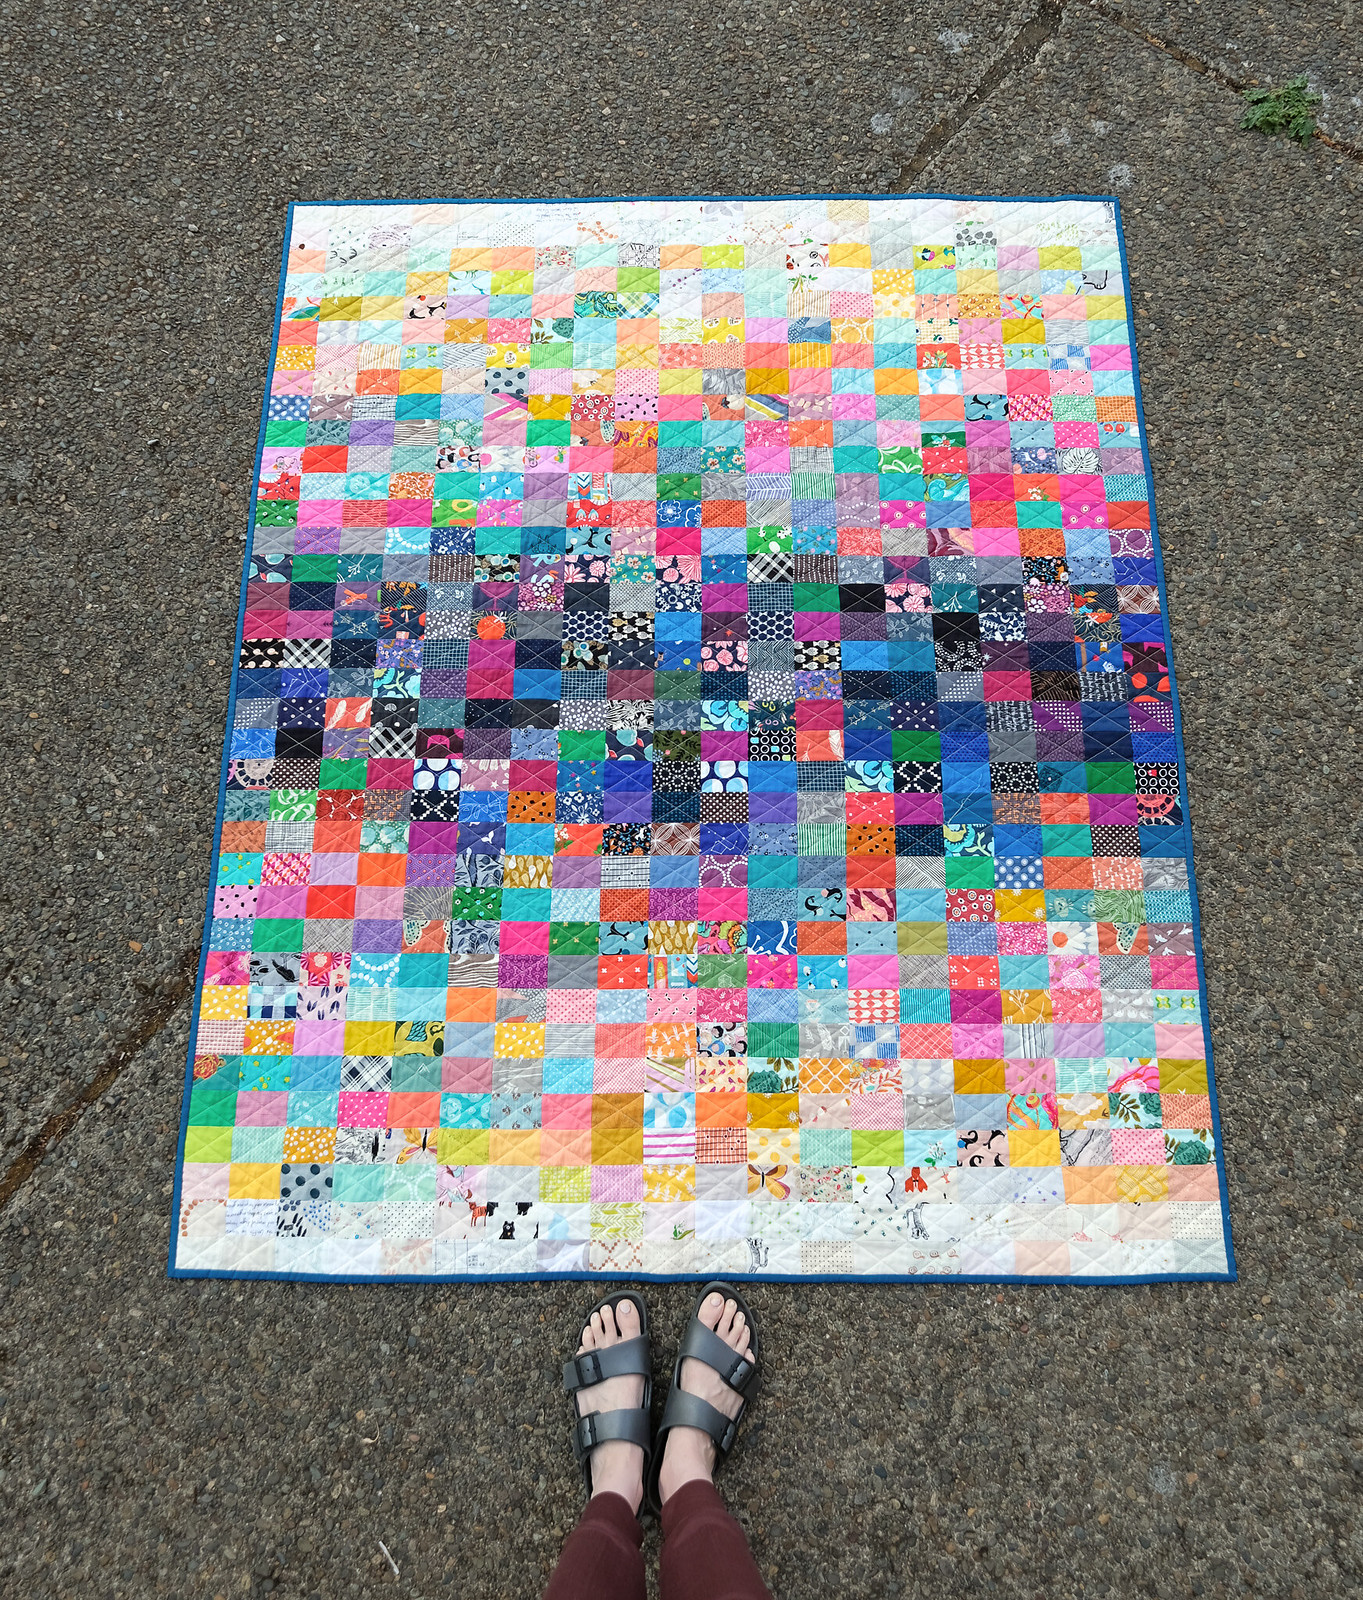 A Valued Scrap Quilt - Kitchen Table Quilting